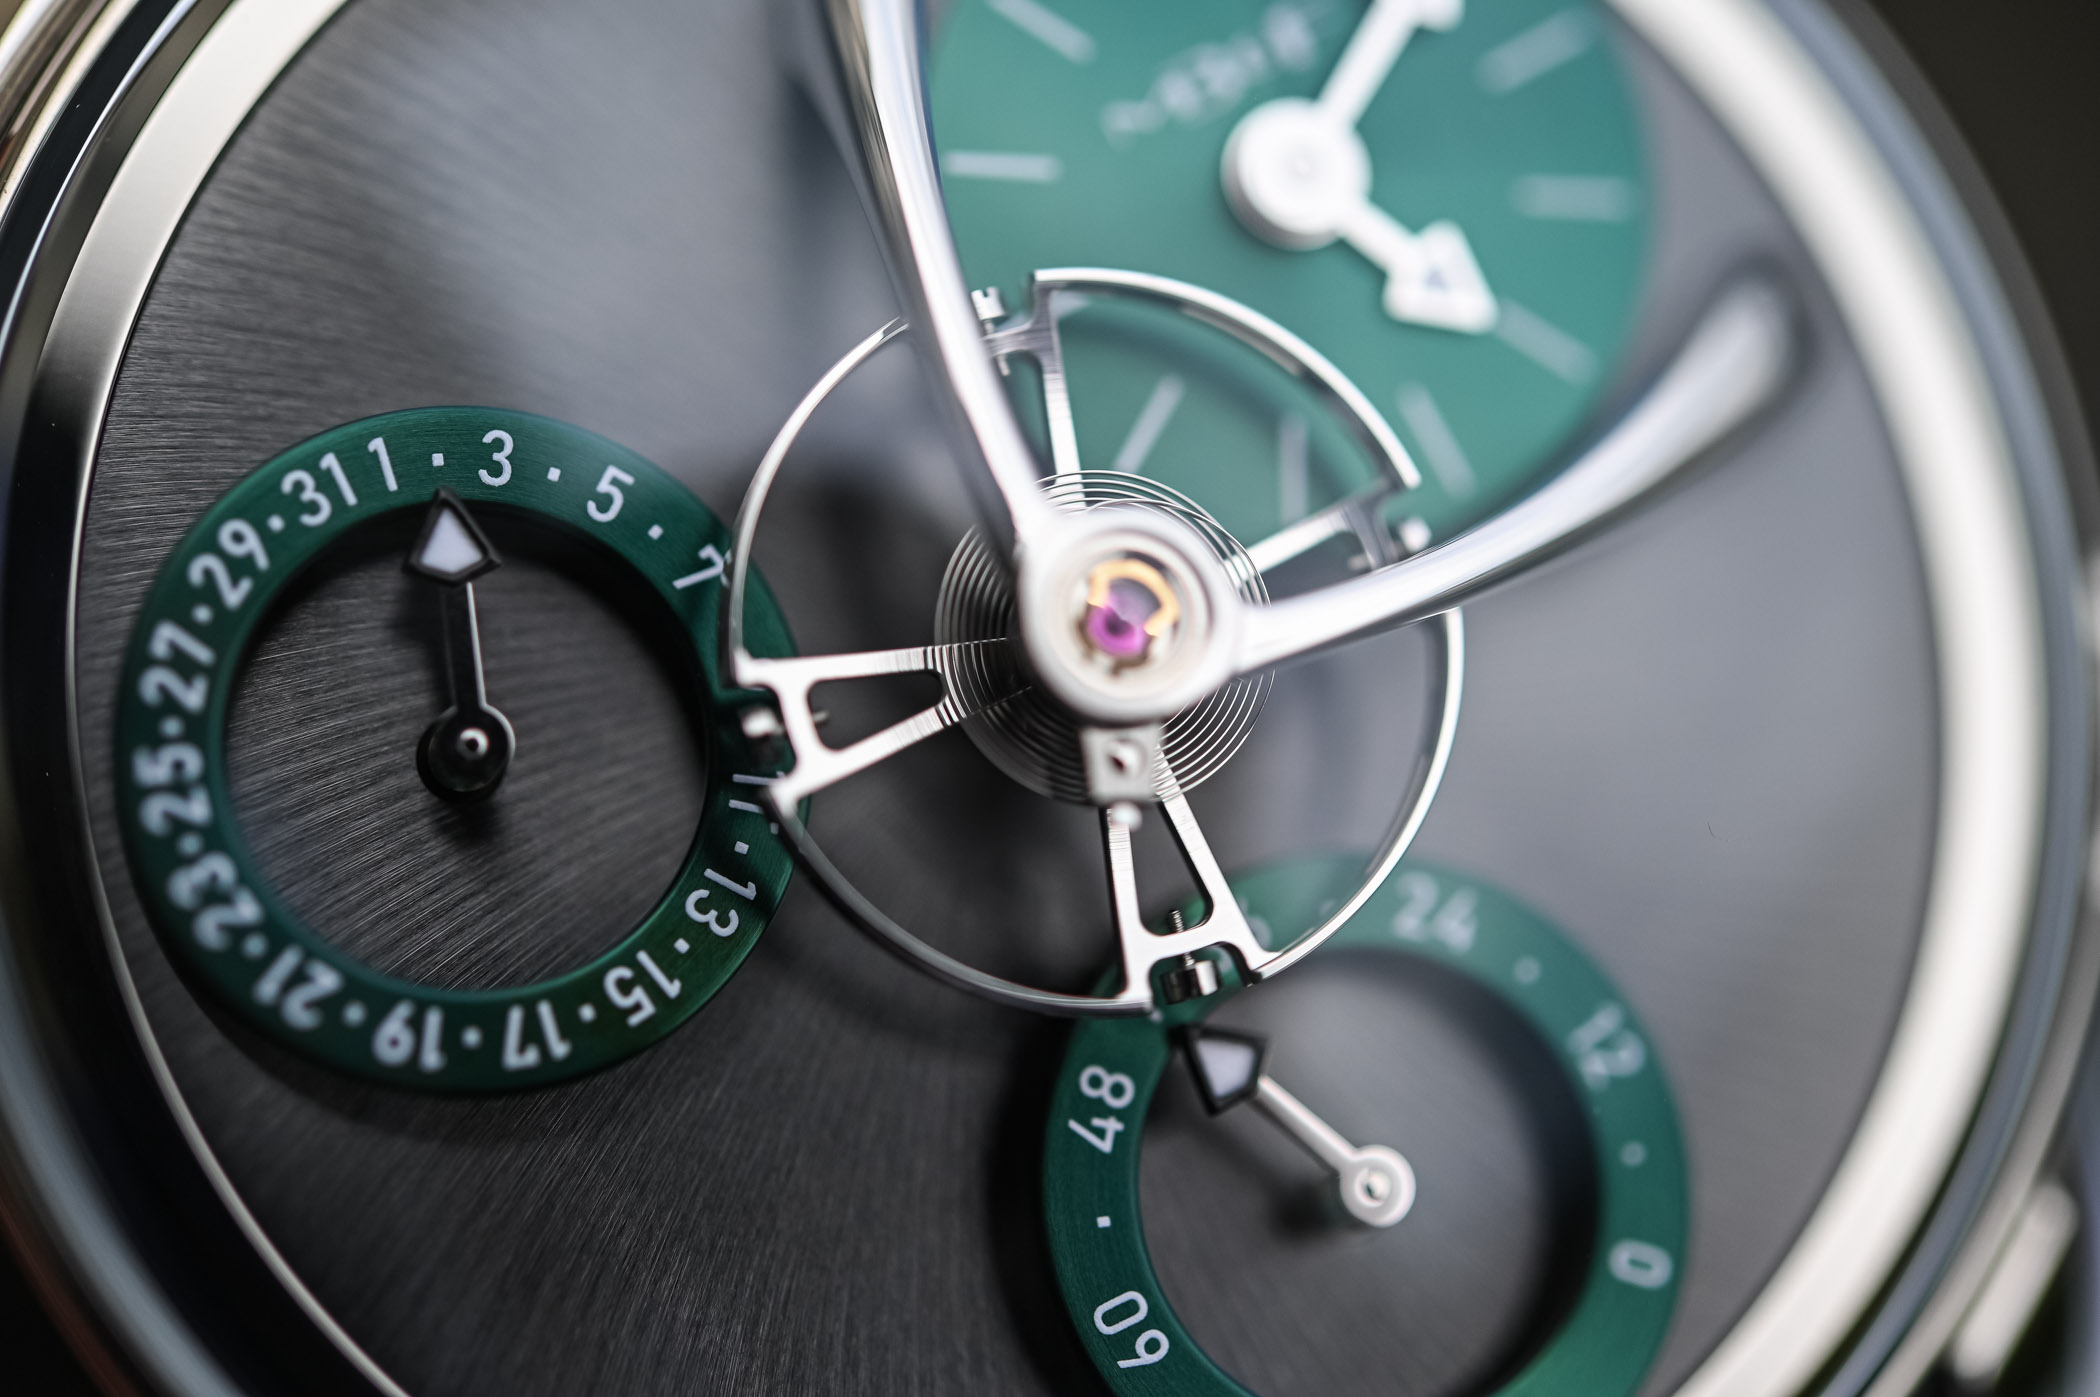 MB&F LM Split Escapement Evo Taipei MADGAllery Edition